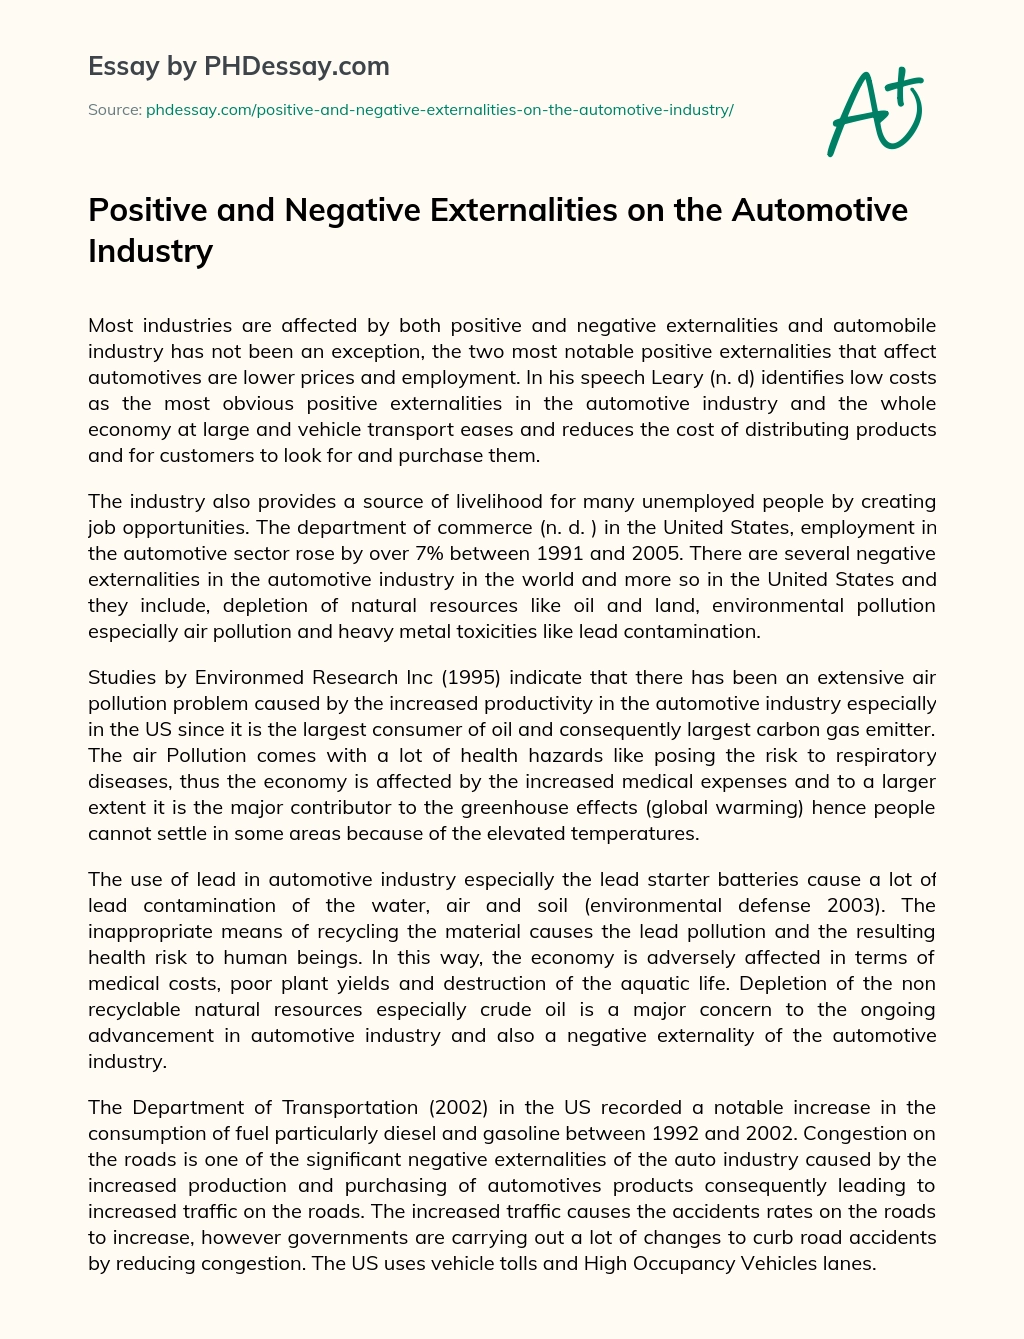 Positive and Negative Externalities on the Automotive Industry essay